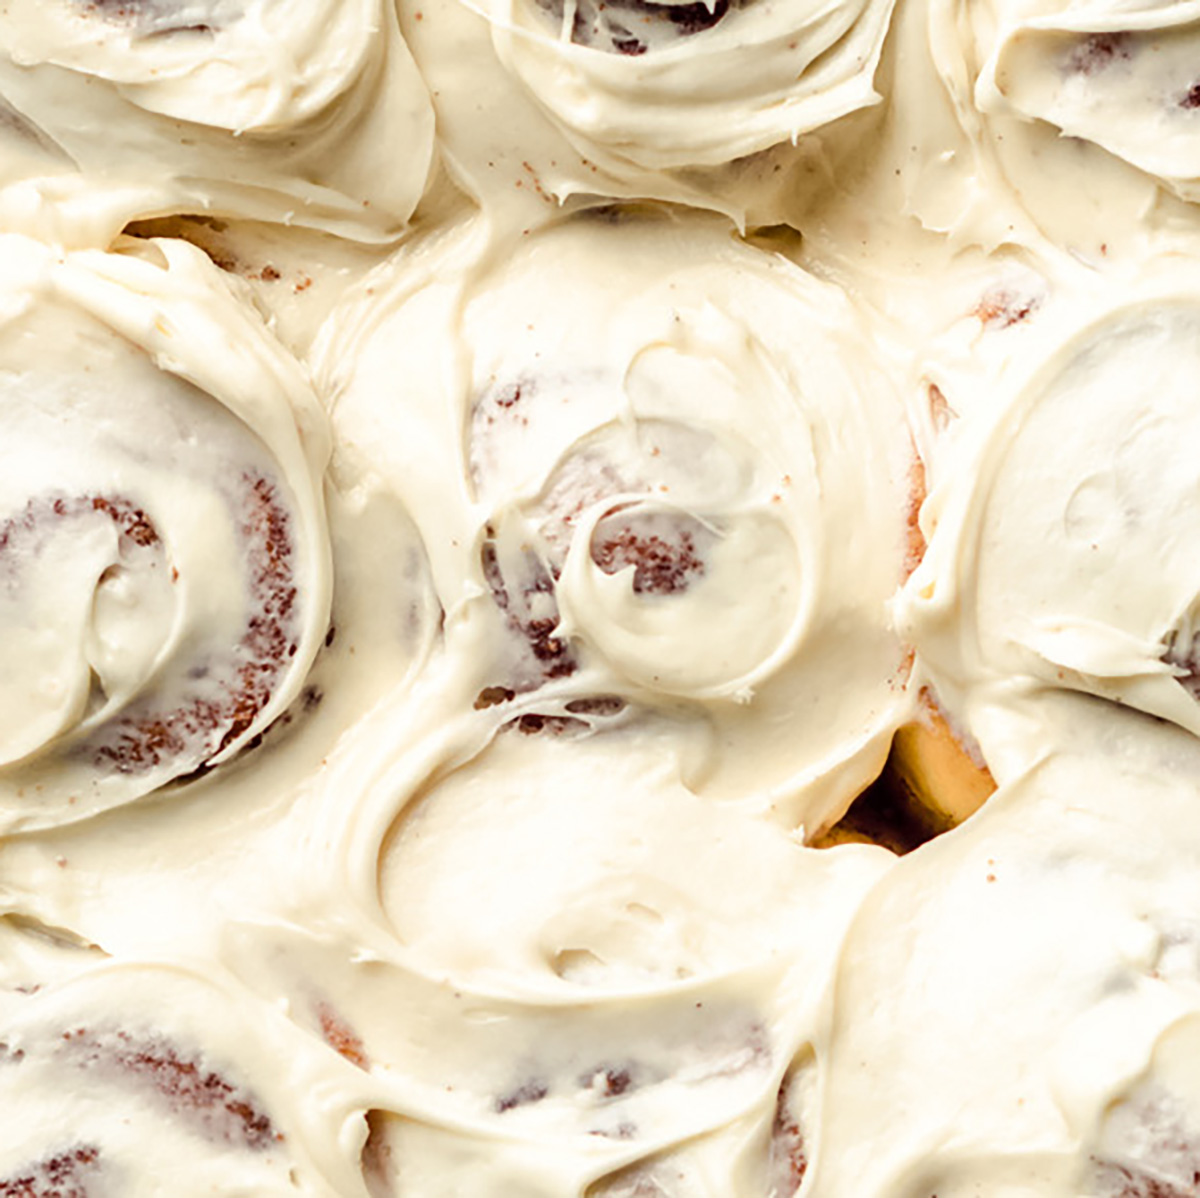 The Best Cream Cheese Frosting